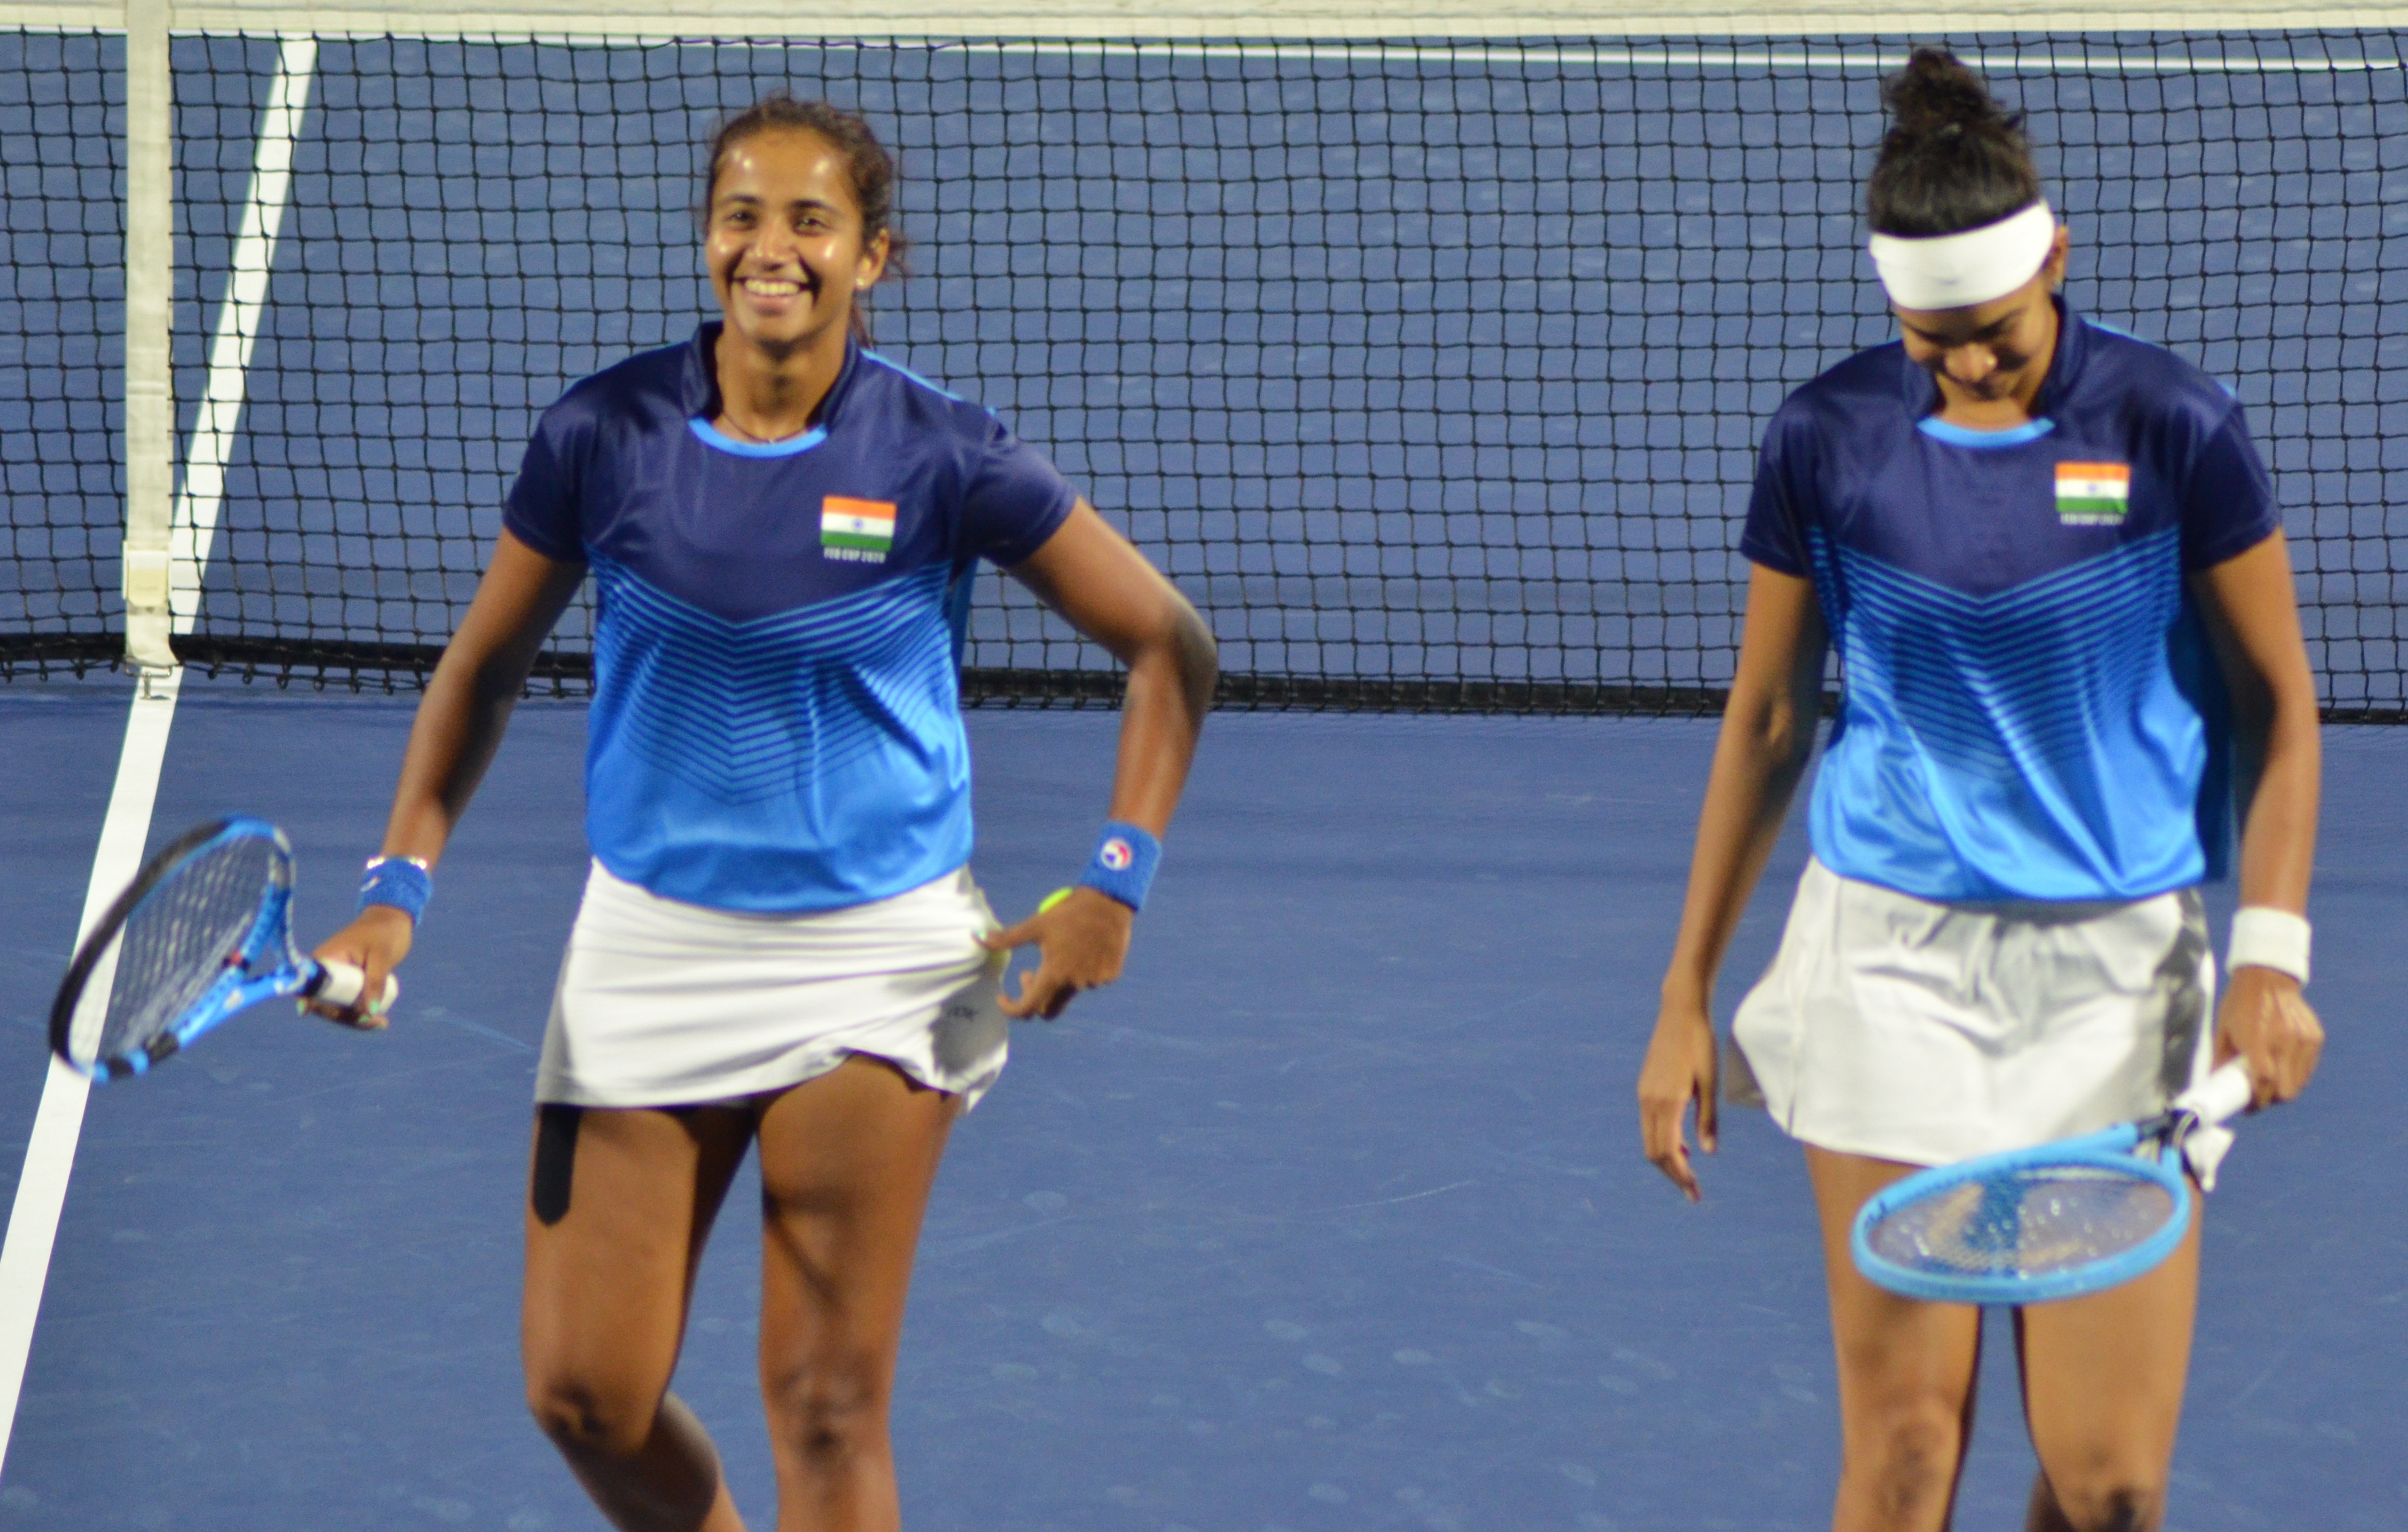 “We are taking it match by match” – Riya Bhatia, who partnered Sowjanya Bavisetti, in the doubles win over Uzbekistan at the Fed Cup 2020.